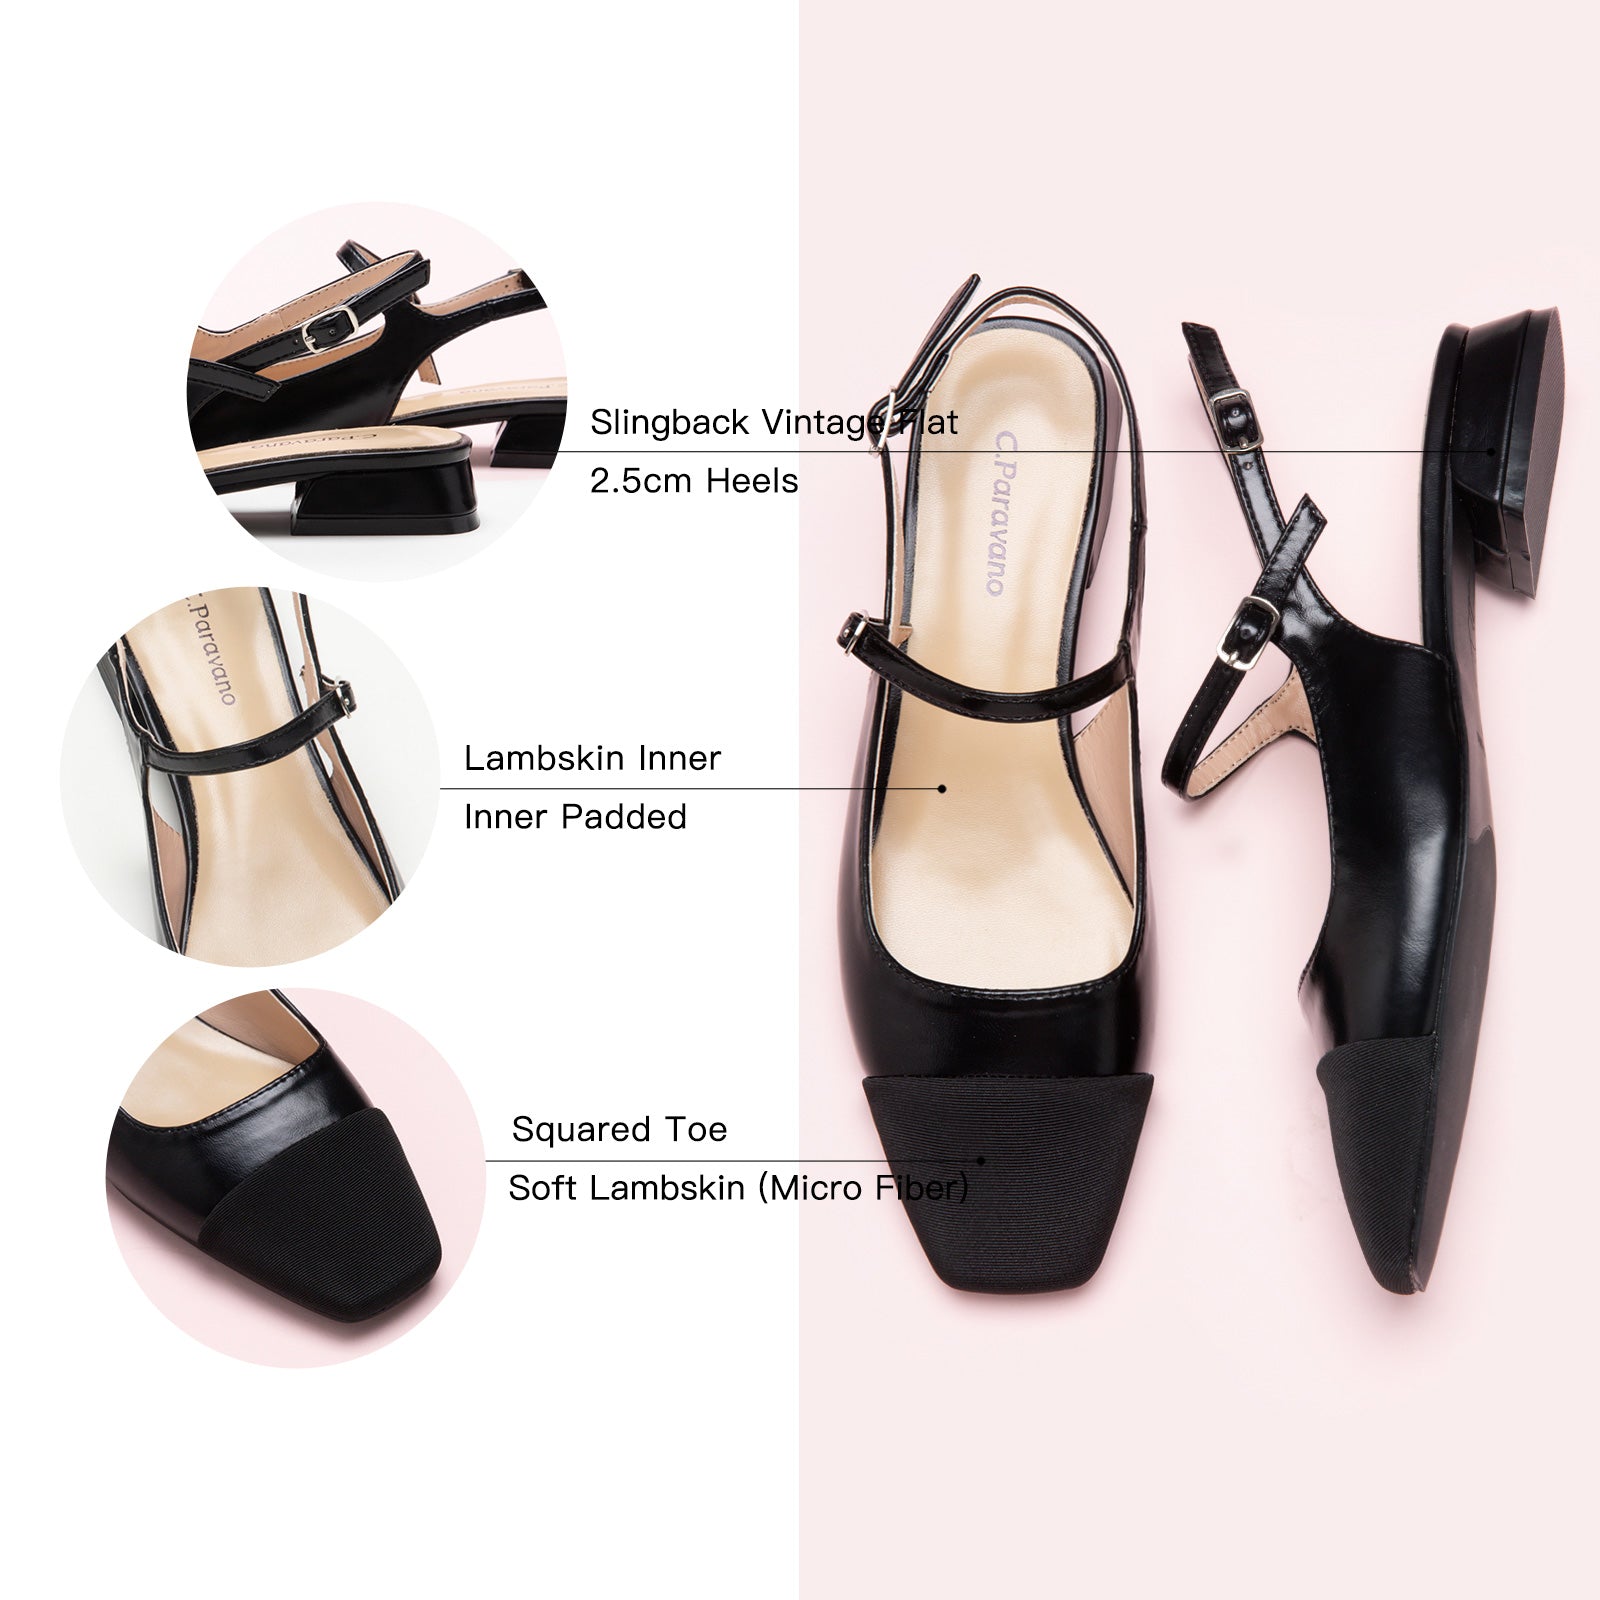 Squared Toe Slingback Flats in Black, a versatile and stylish addition to elevate your footwear collection